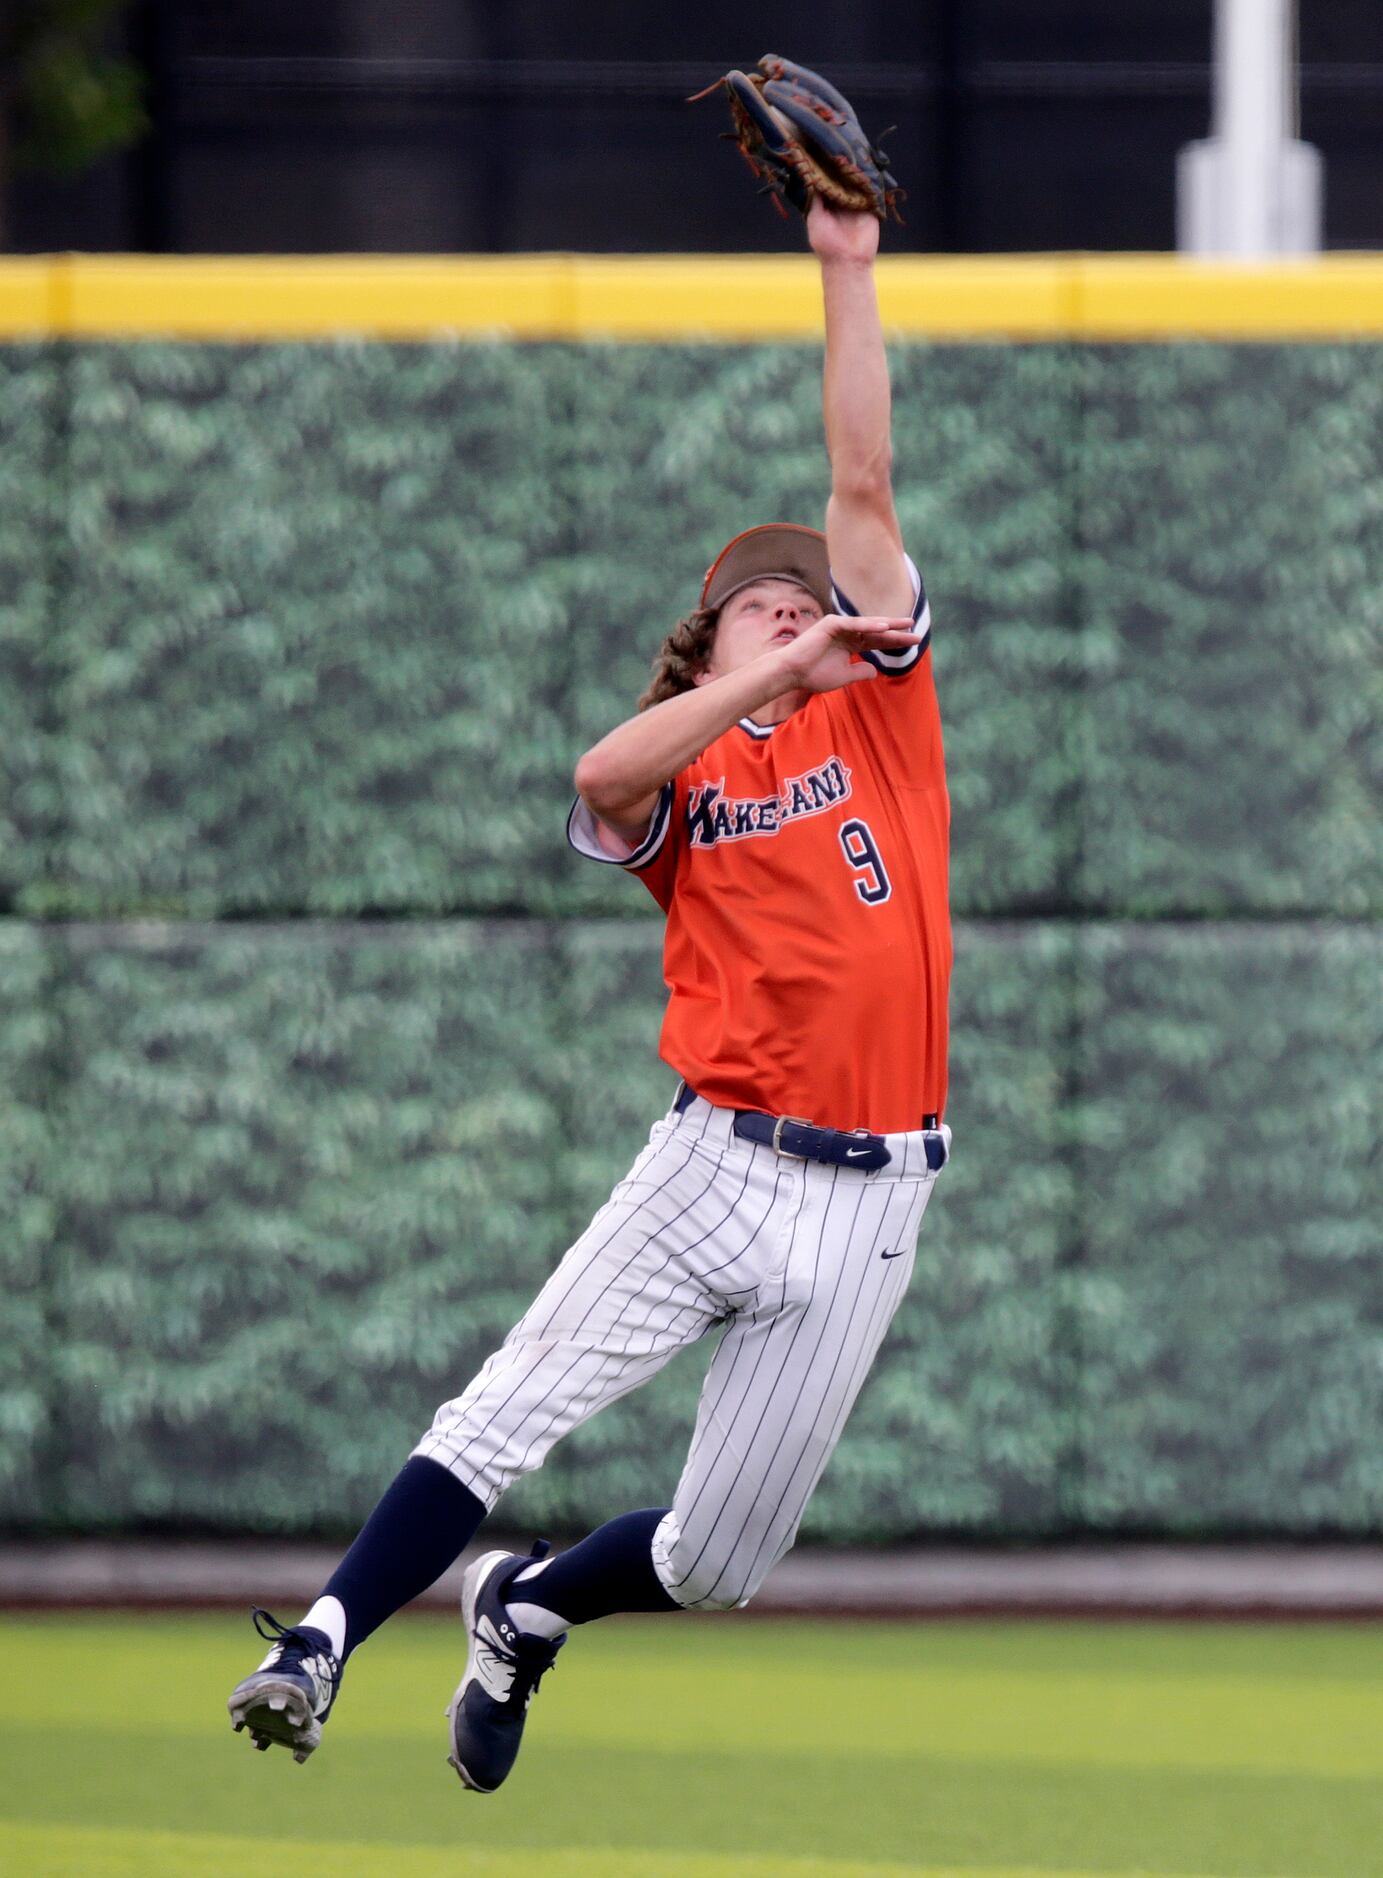 Wakeland High School second baseman Dylan Snead (9) makes a leaping catch to end the second...